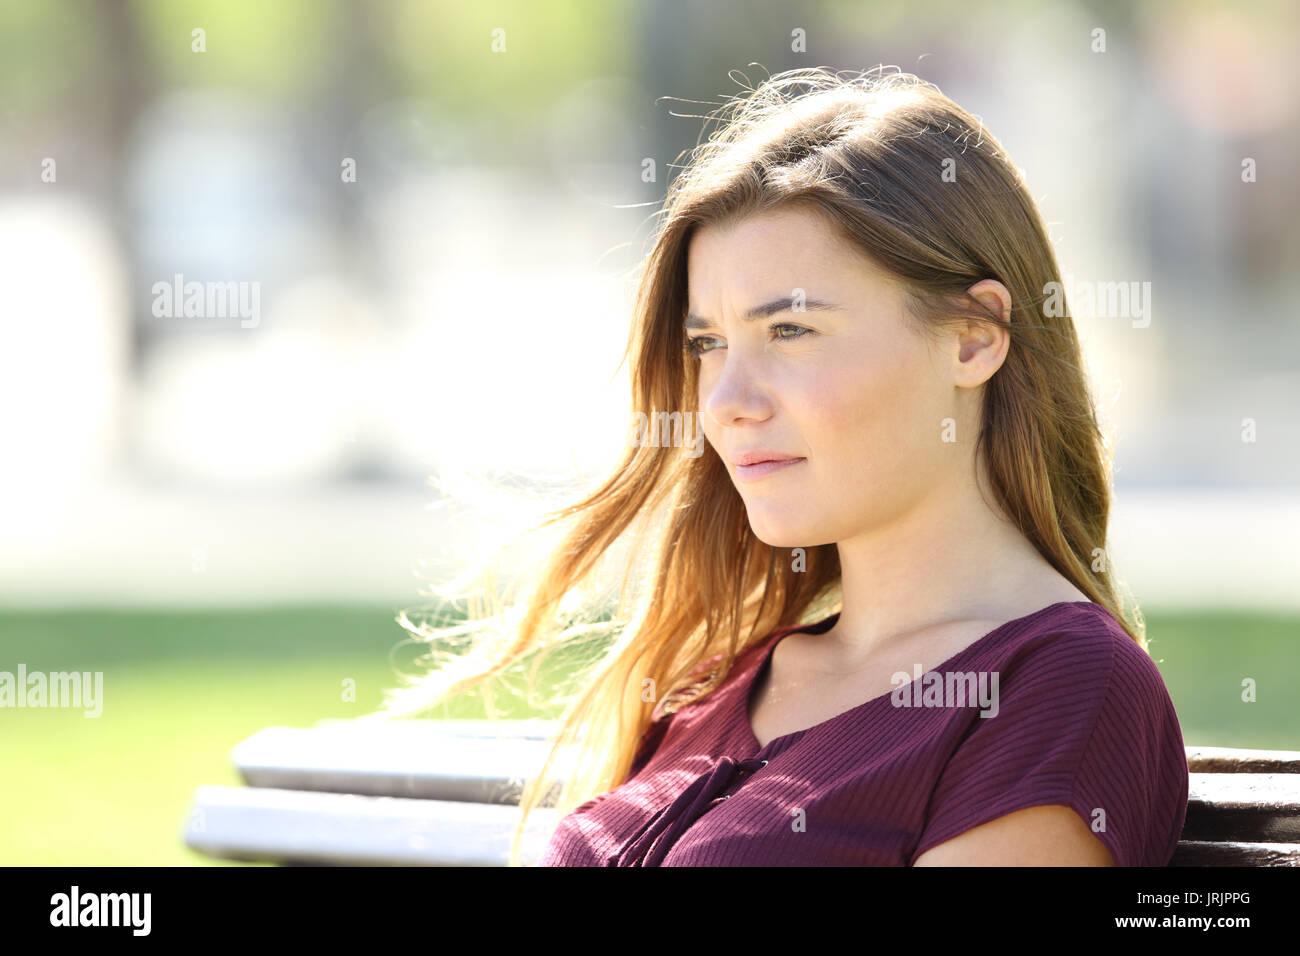 Portrait of a serious girl sitting on a bench thinking and looking away outdoors Stock Photo